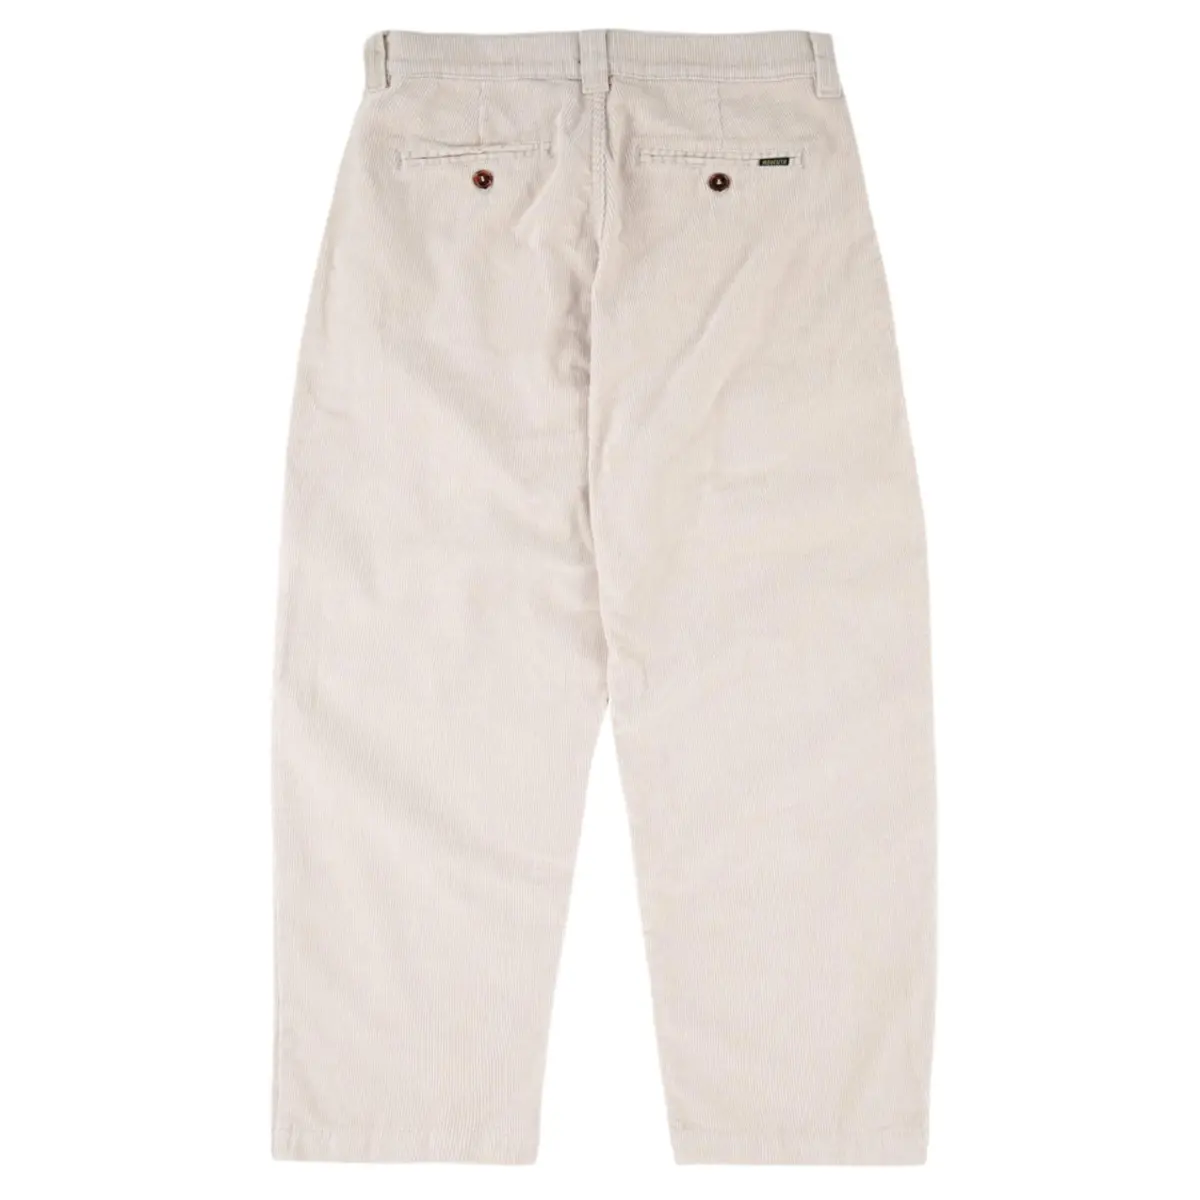 OG CHINO CORD CEMENT PANTS